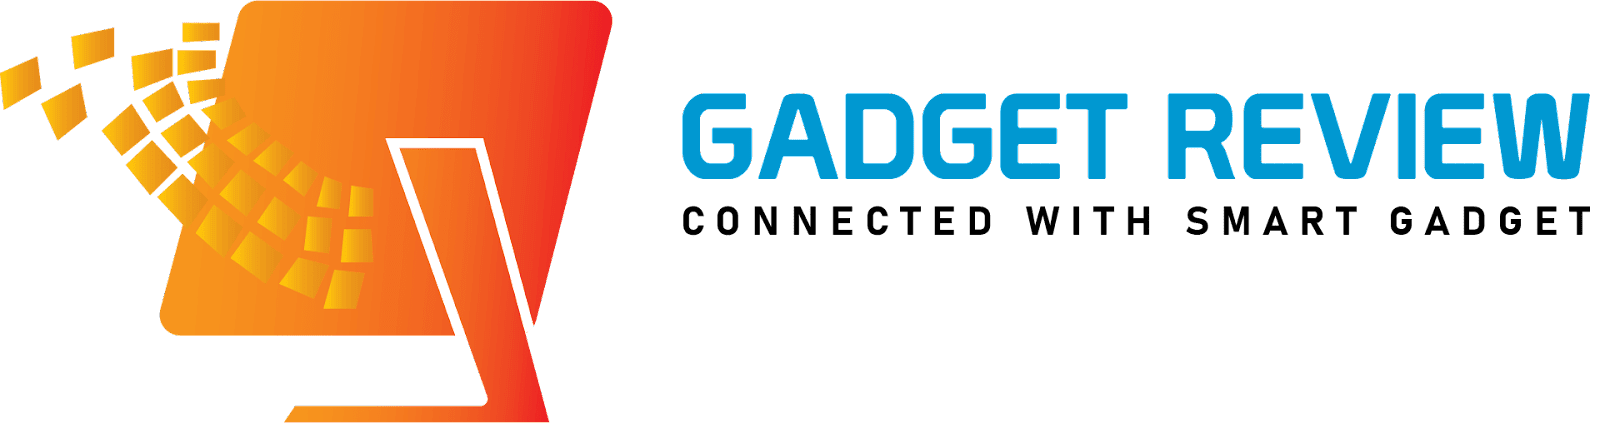 Gadget Review | Laptop Review | Smartphone Review | Smart Home Review